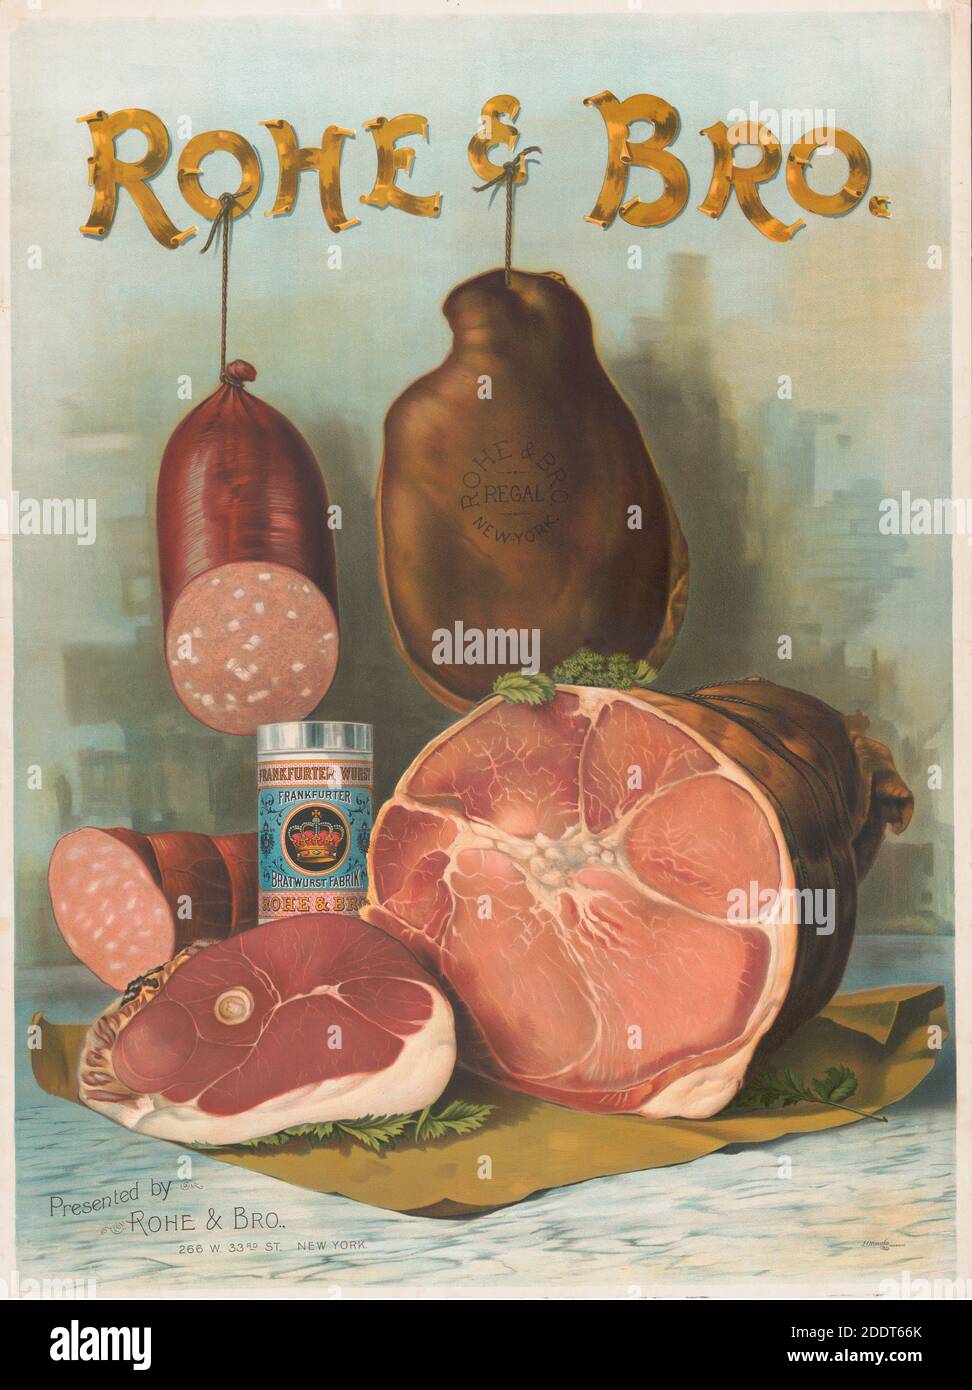 Retro illustration of meat production of firm Rohe & Bro from New York. USA. 1930s Stock Photo